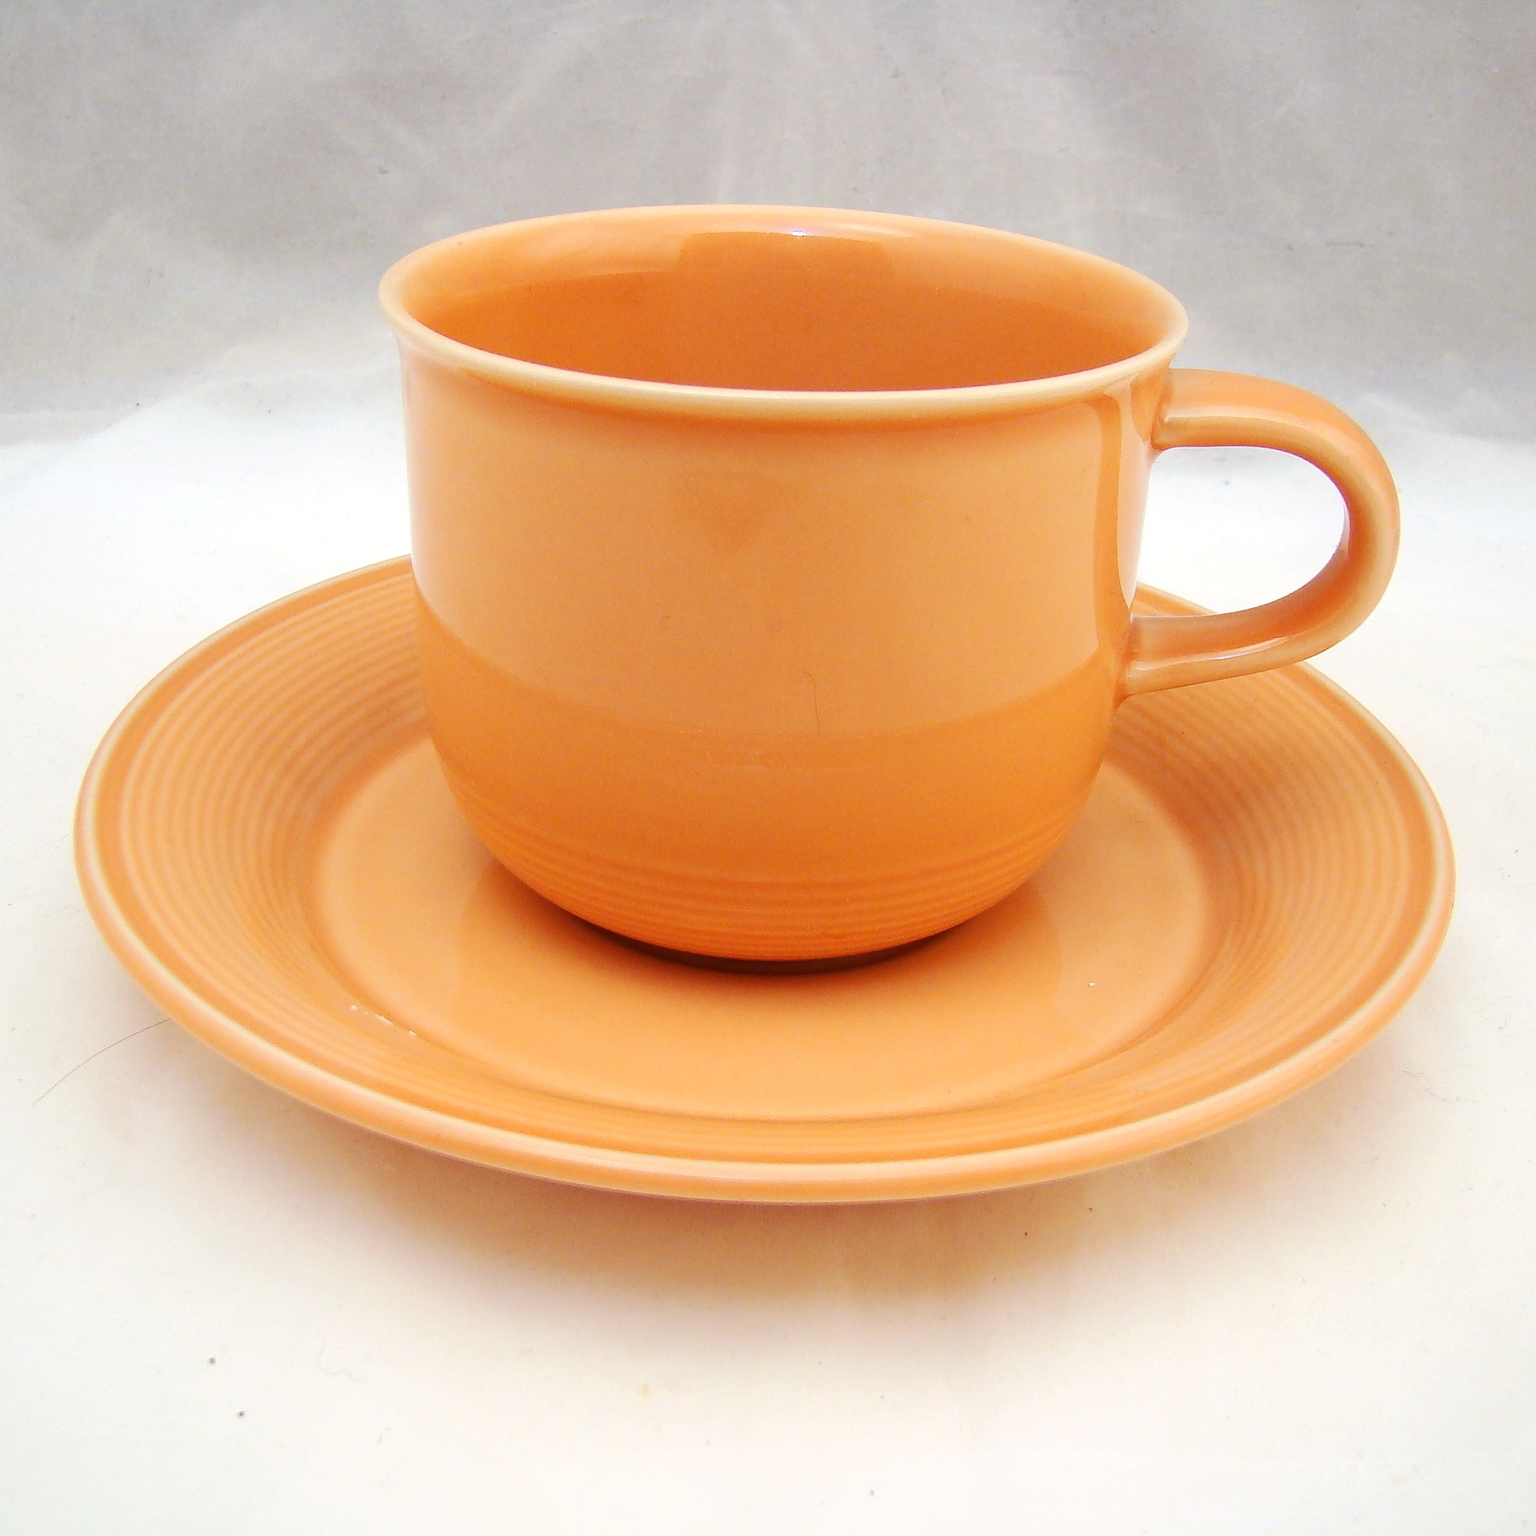 Nancy Calhoun Solid Color White Teacup Cup and Saucer Set s